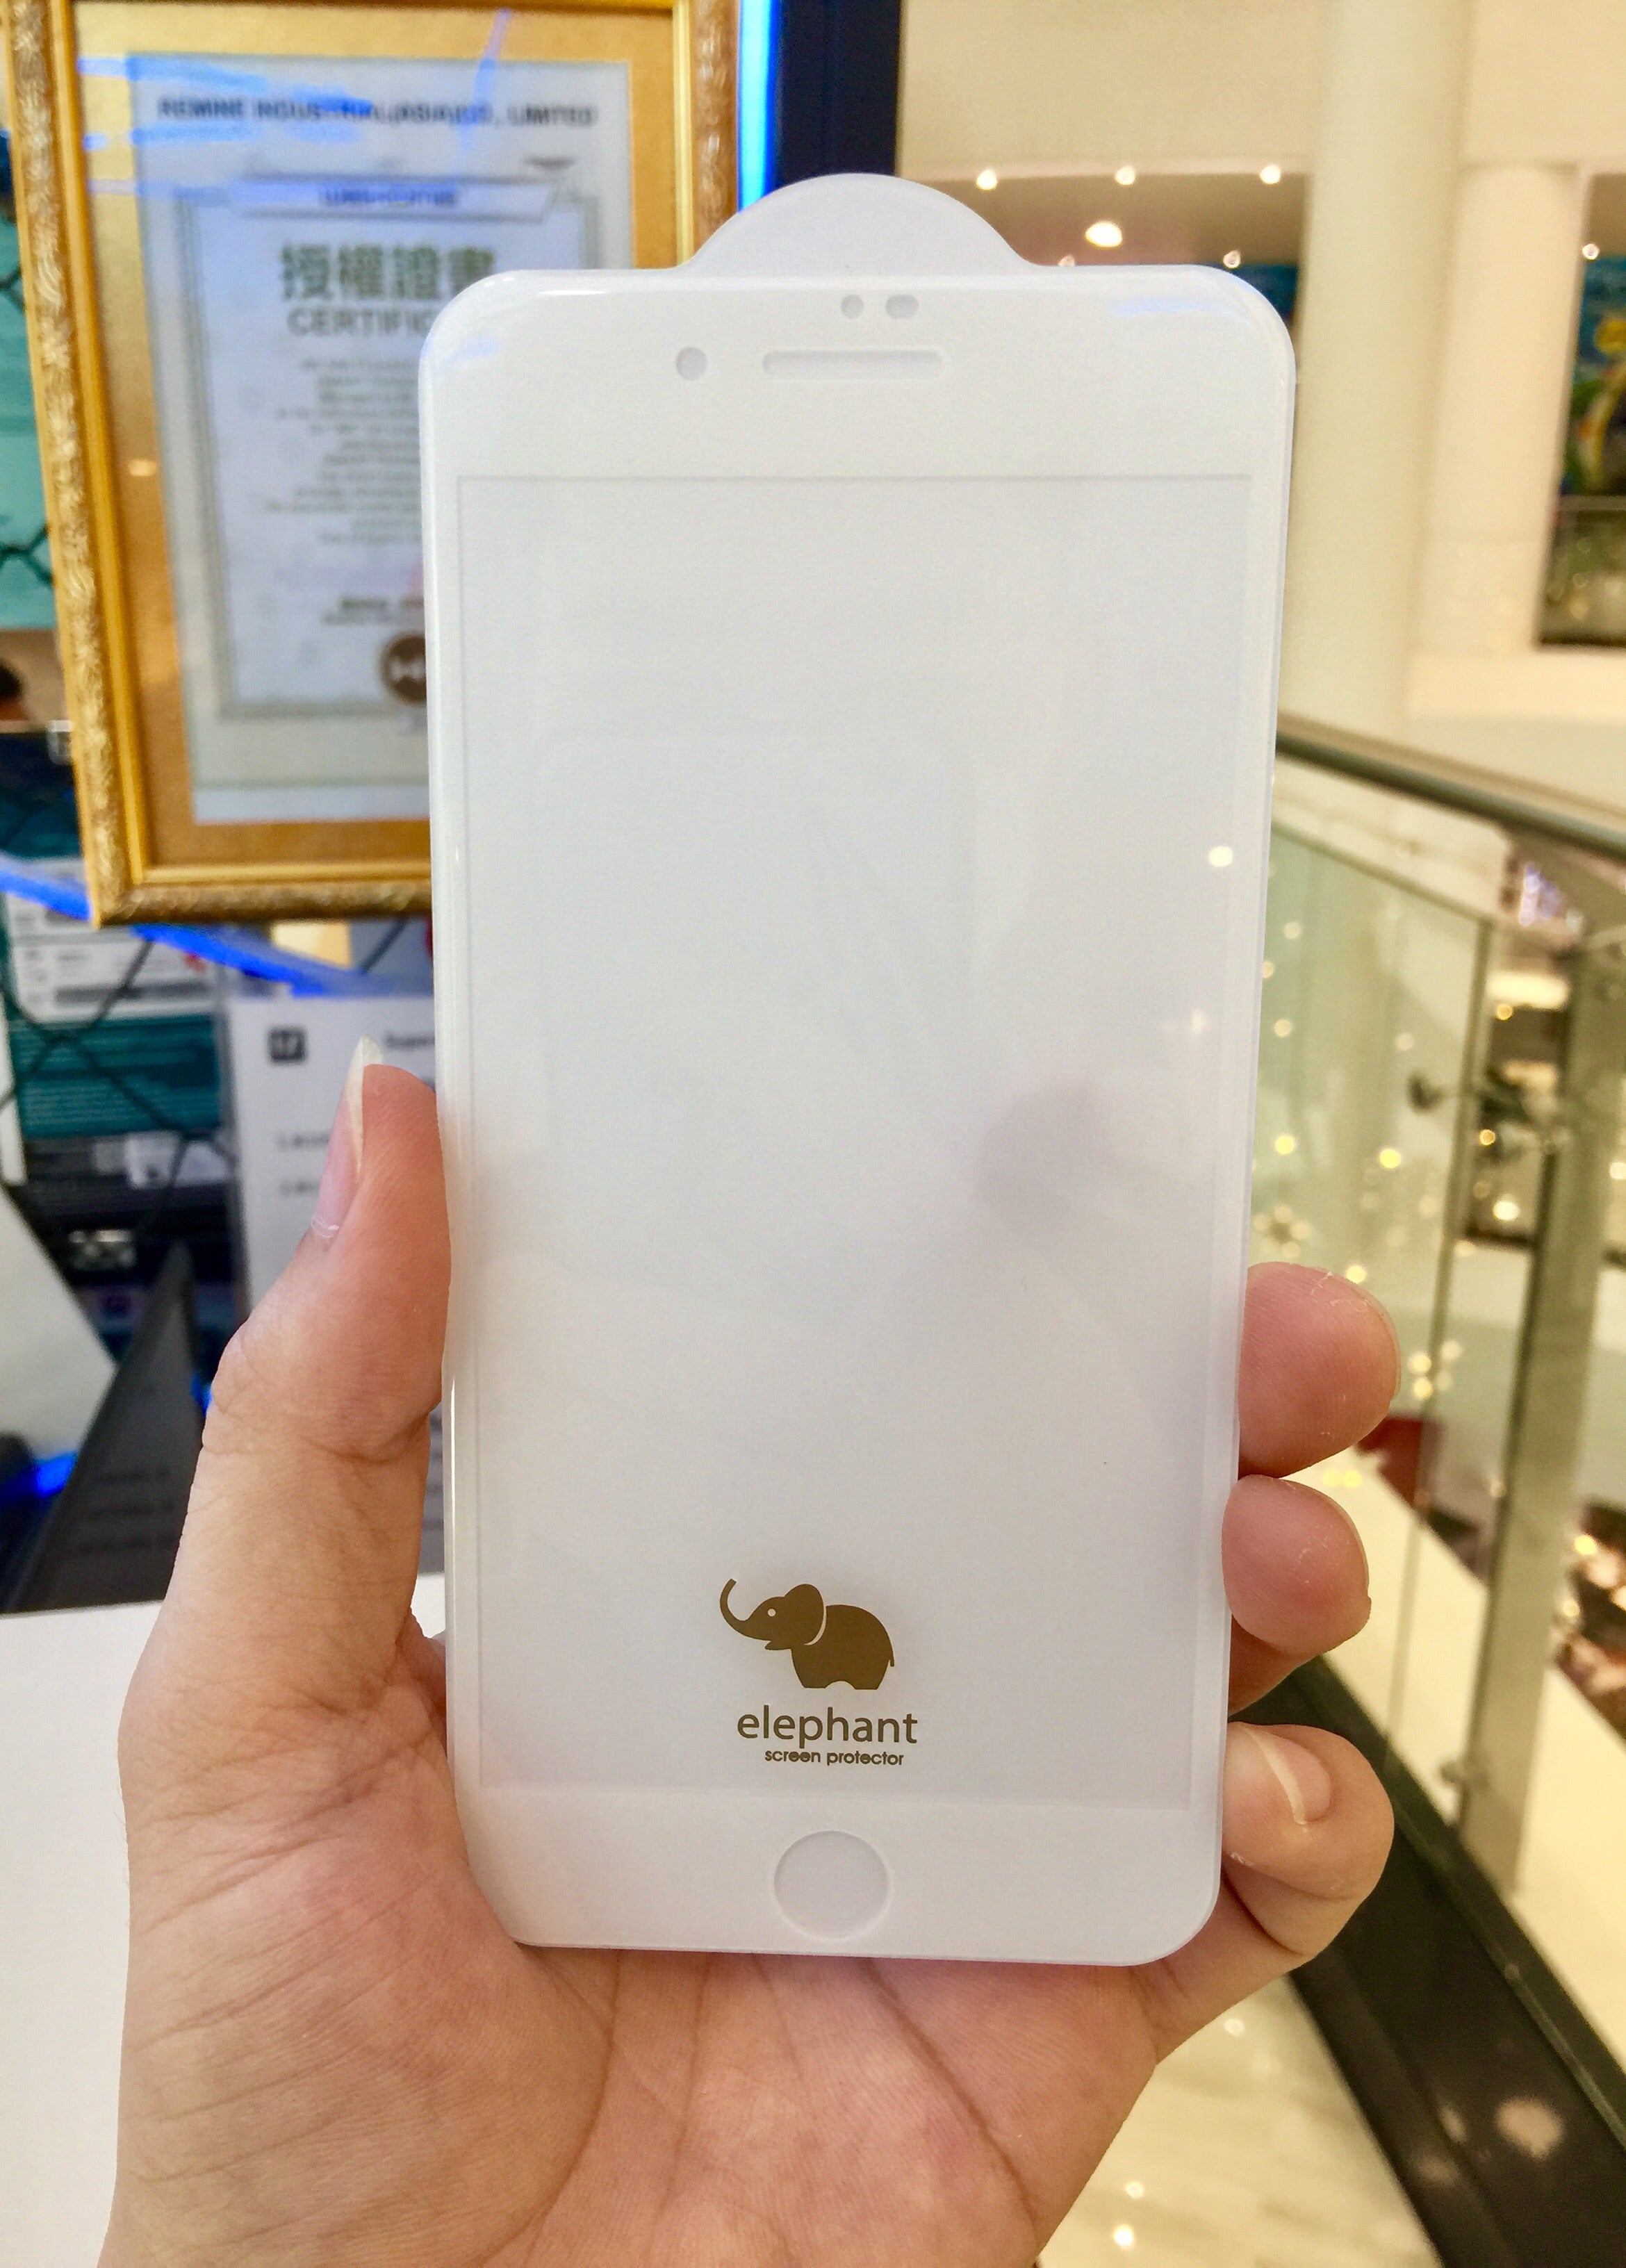 WTP-018 Elephant 6D Full Screen Protector for iPhone